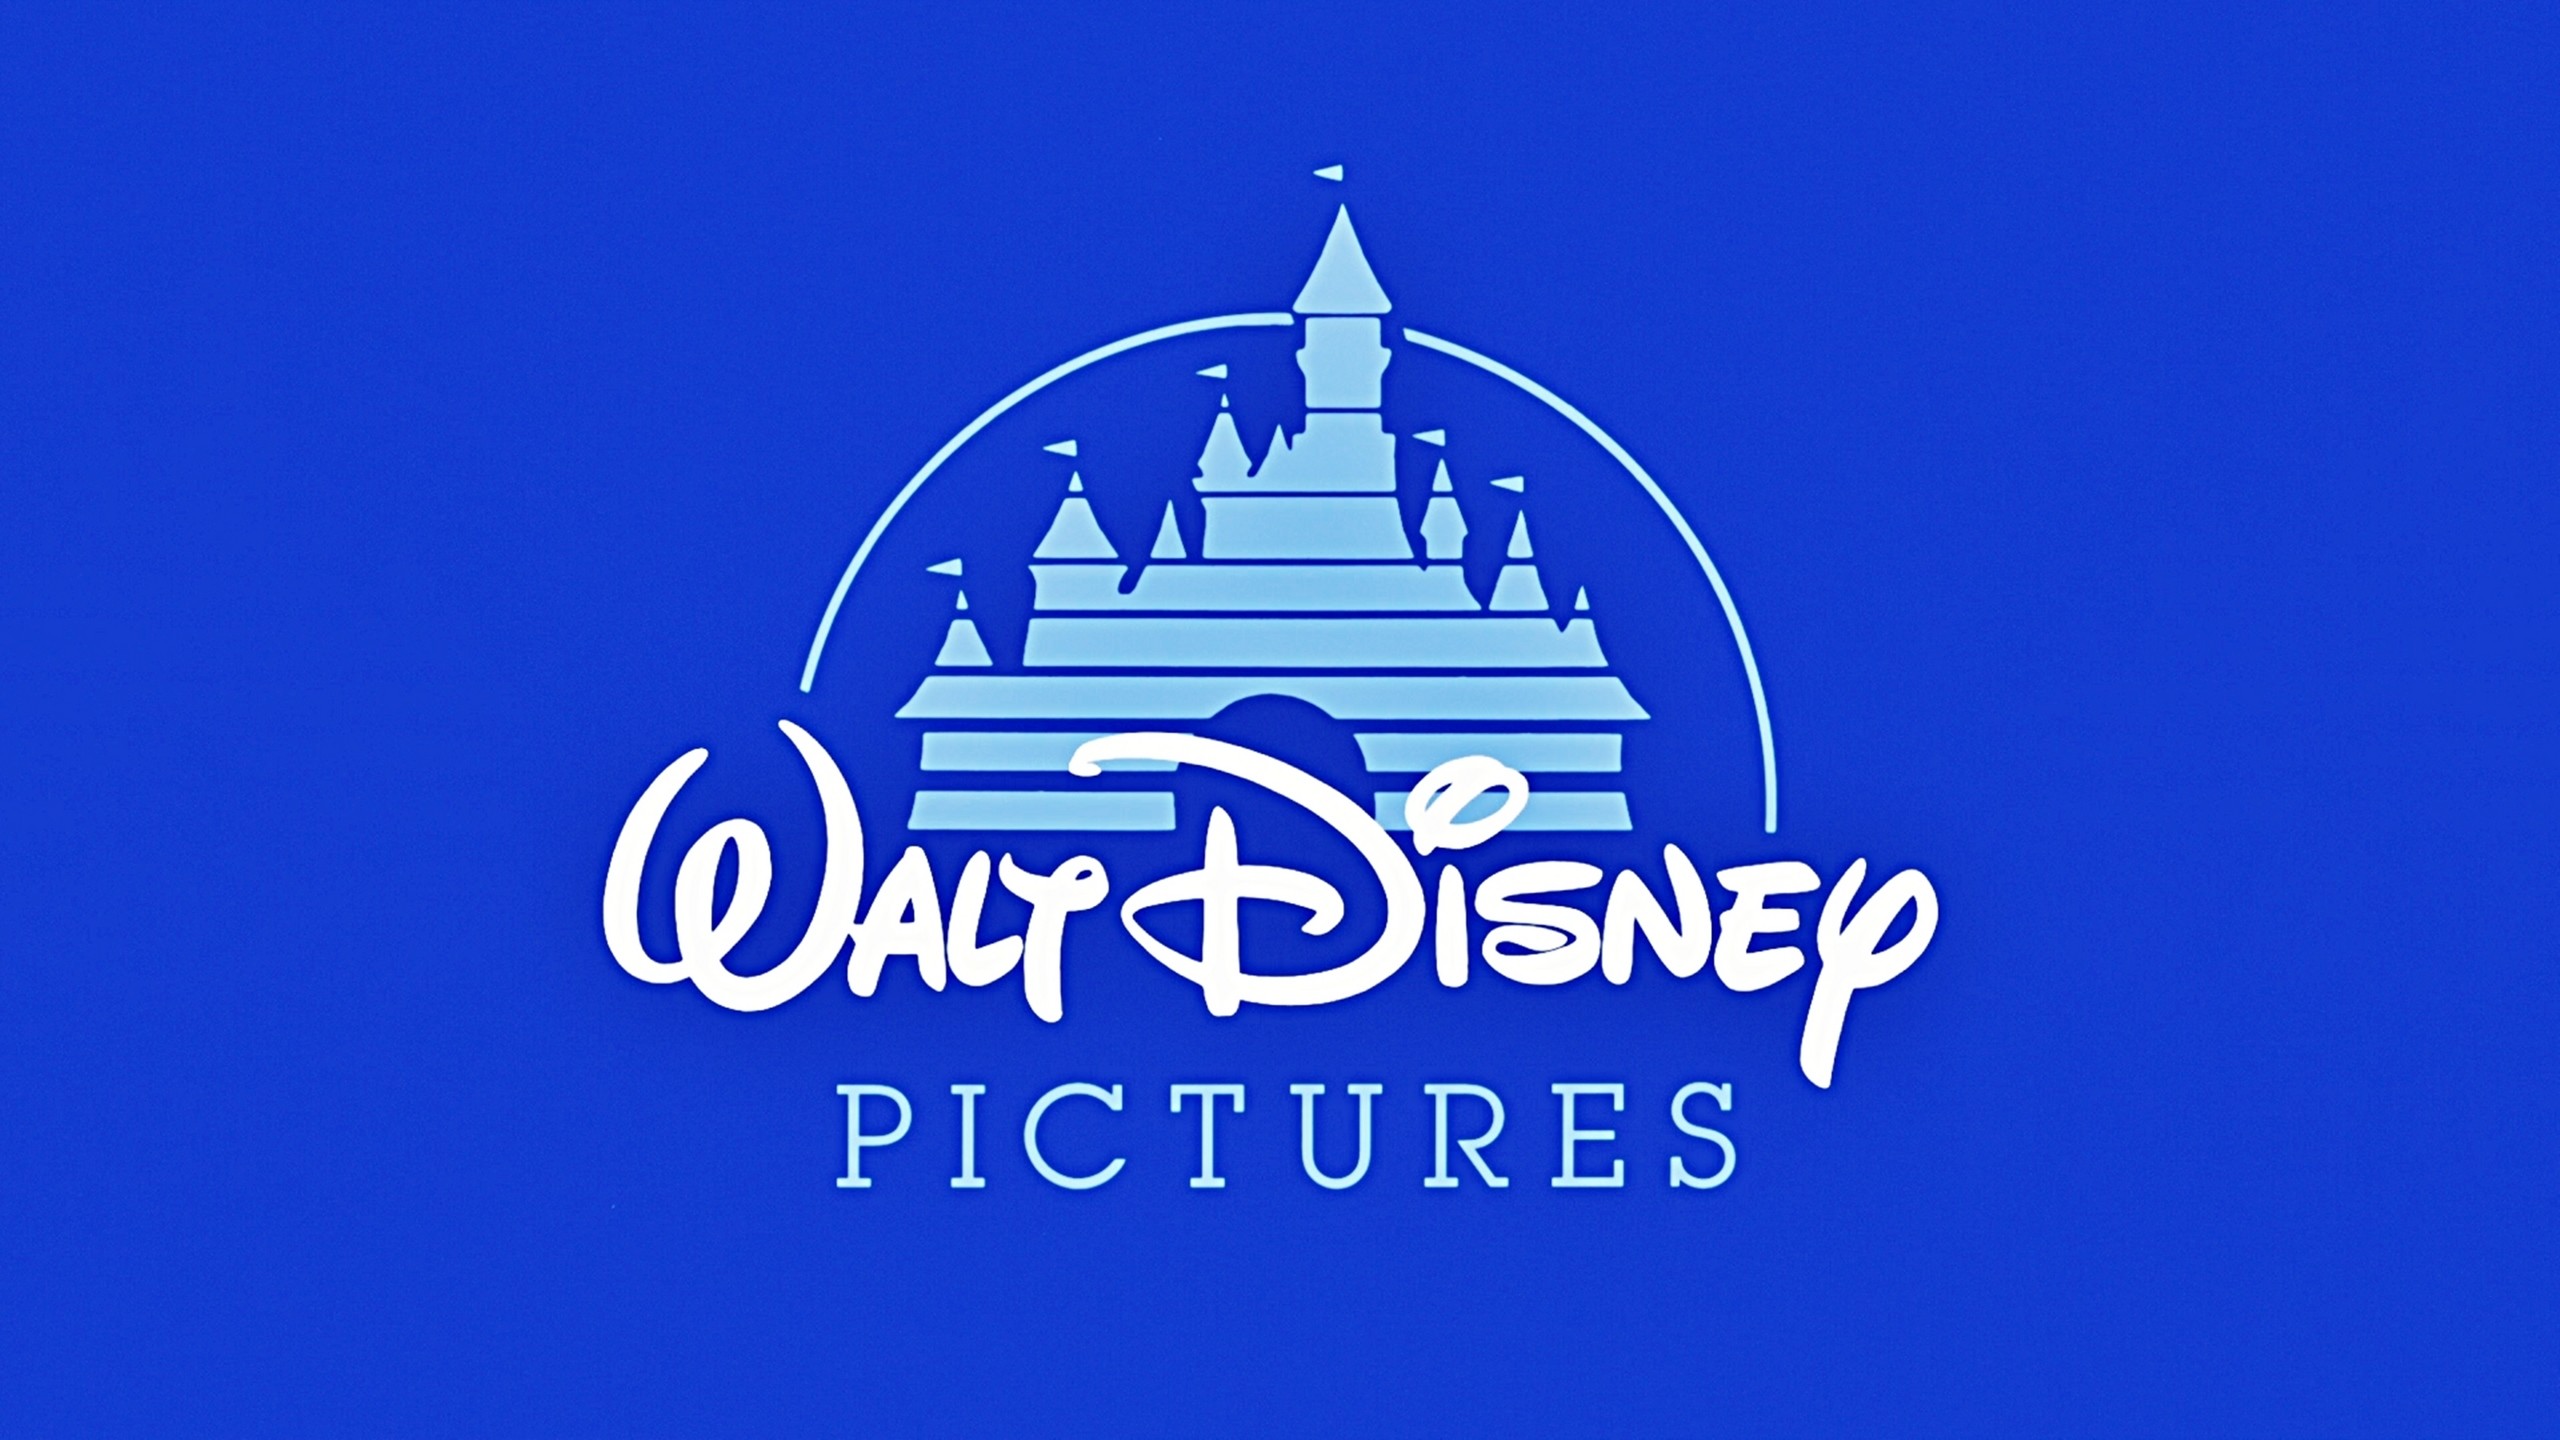 2560x1440 What's Going On With The 'D' In The Disney Logo? | Mental Floss